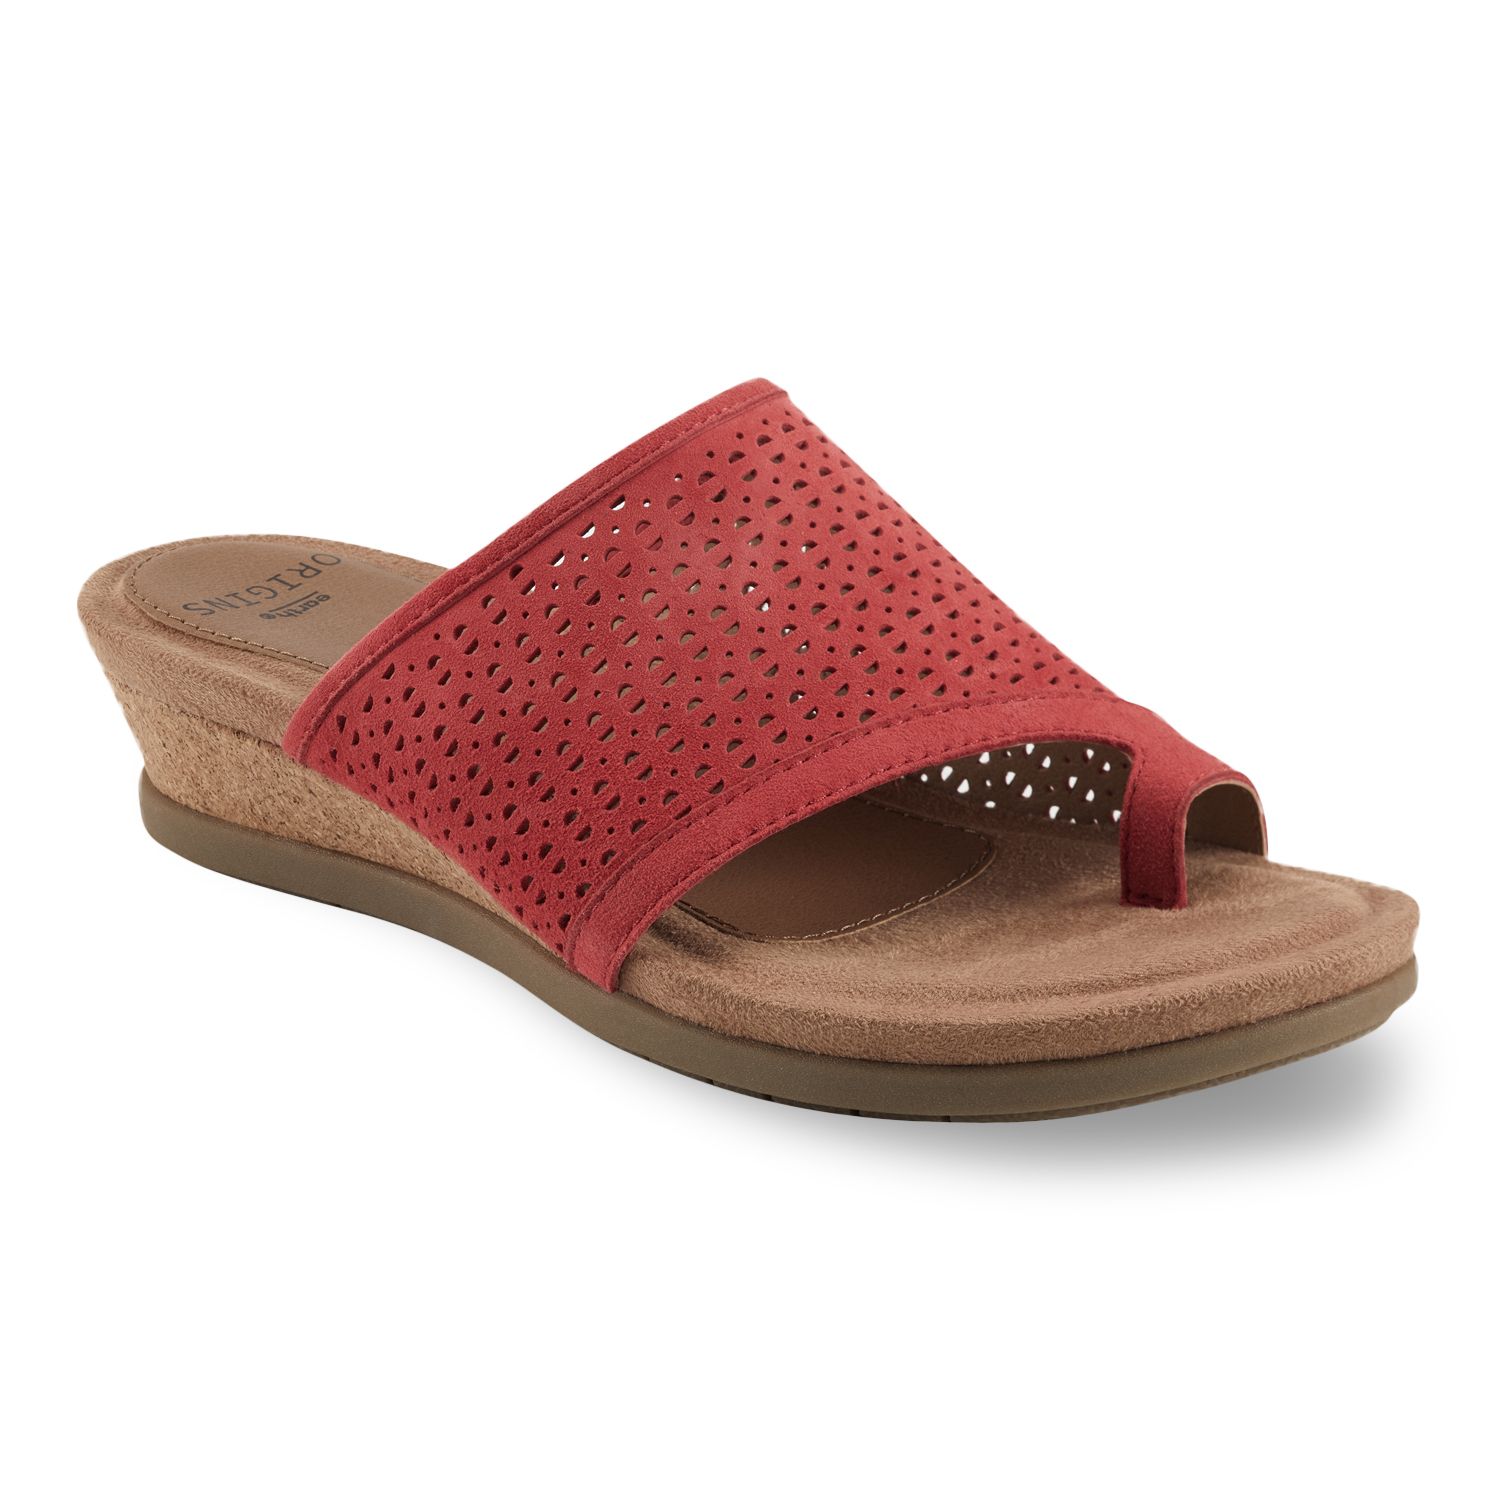 Image for Earth Origins Pearl Women's Wedge Sandals at Kohl's.